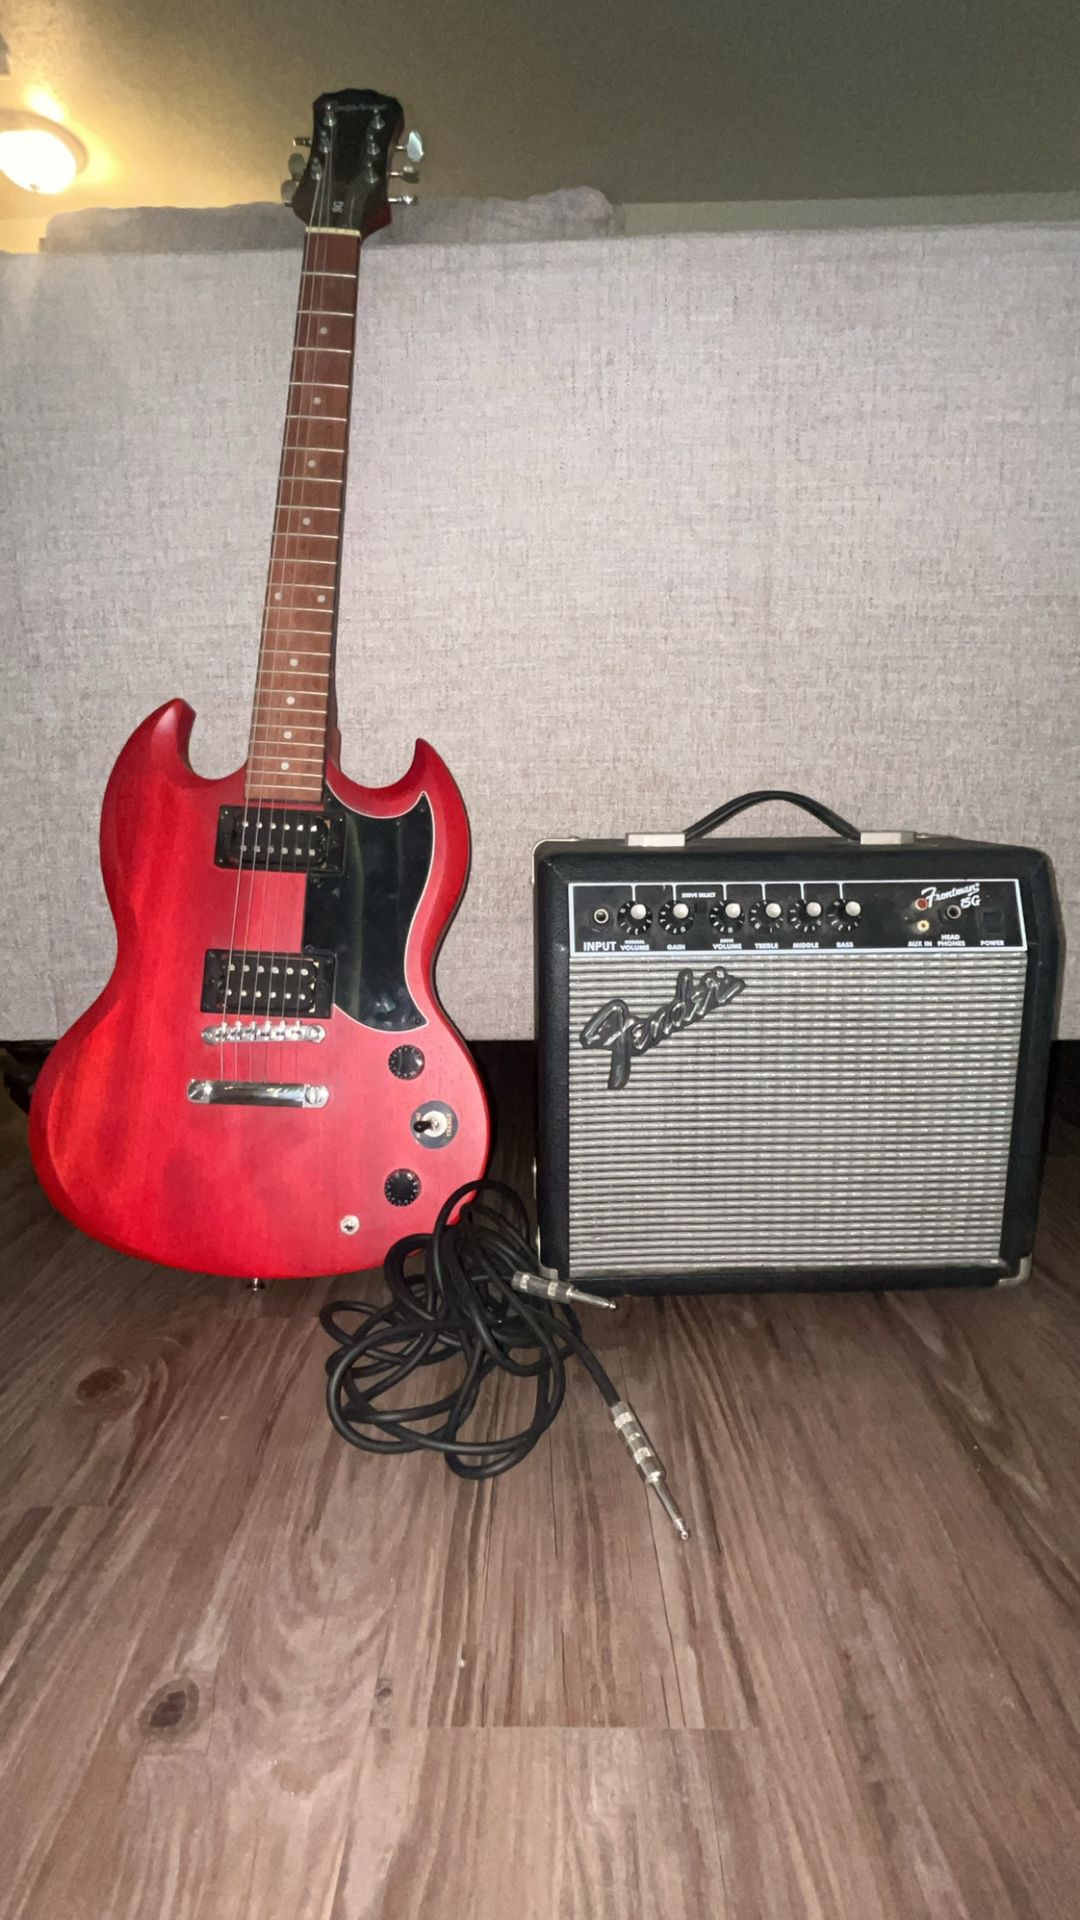 Epiphone Guitar with Amp